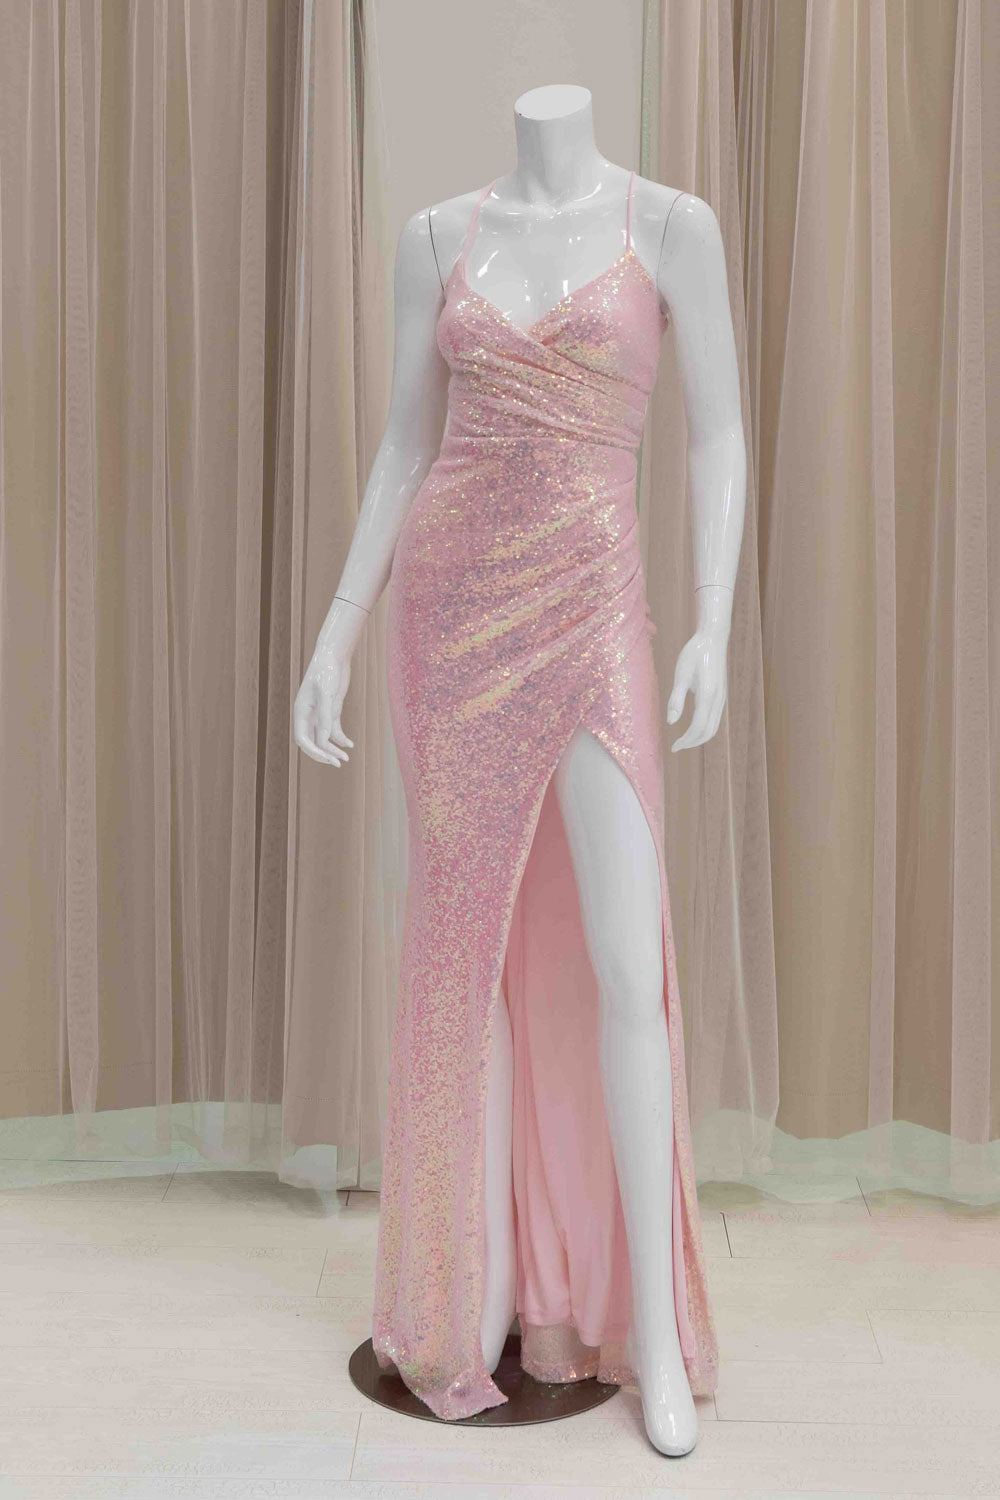 Iridescent Pink Sequin Form Fitting Evening Gown